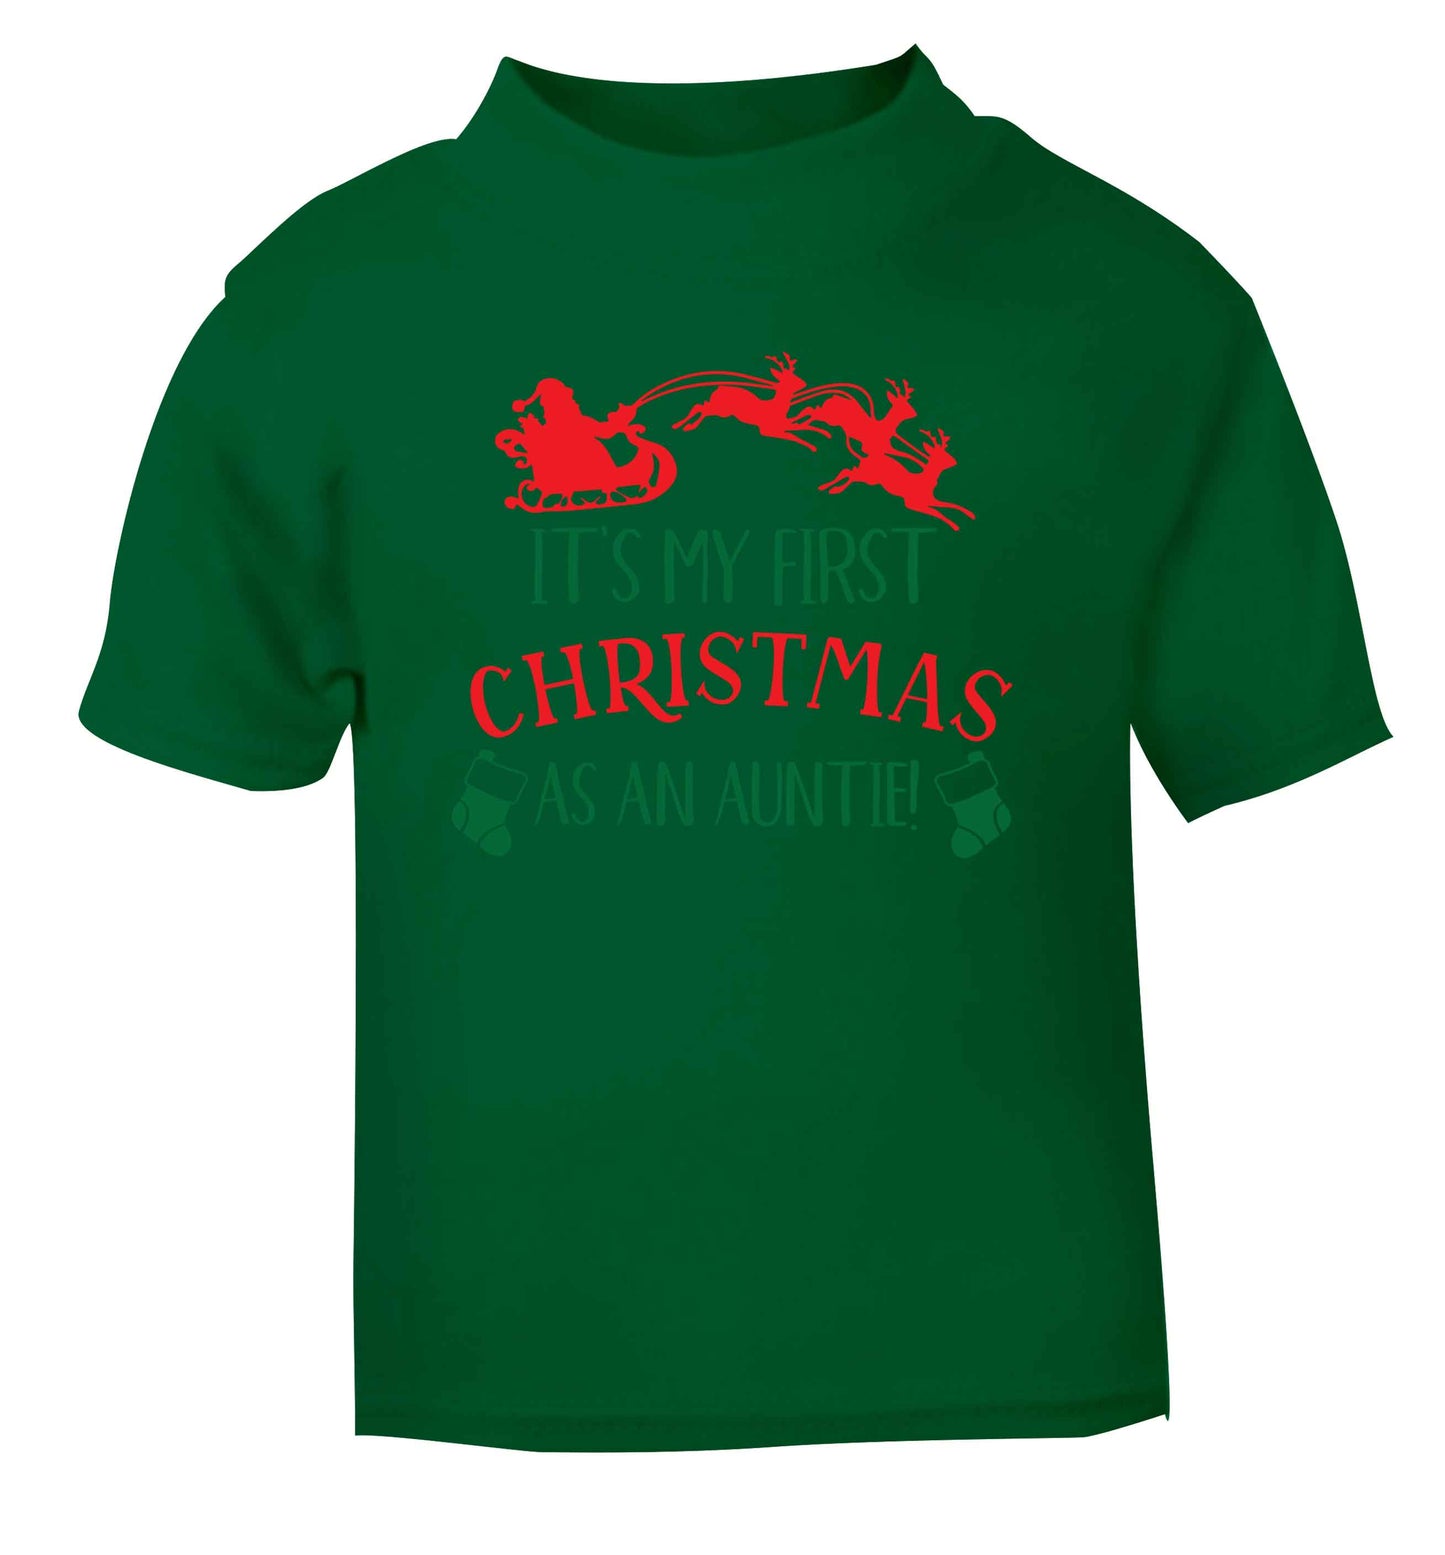 It's my first Christmas as an auntie! green Baby Toddler Tshirt 2 Years